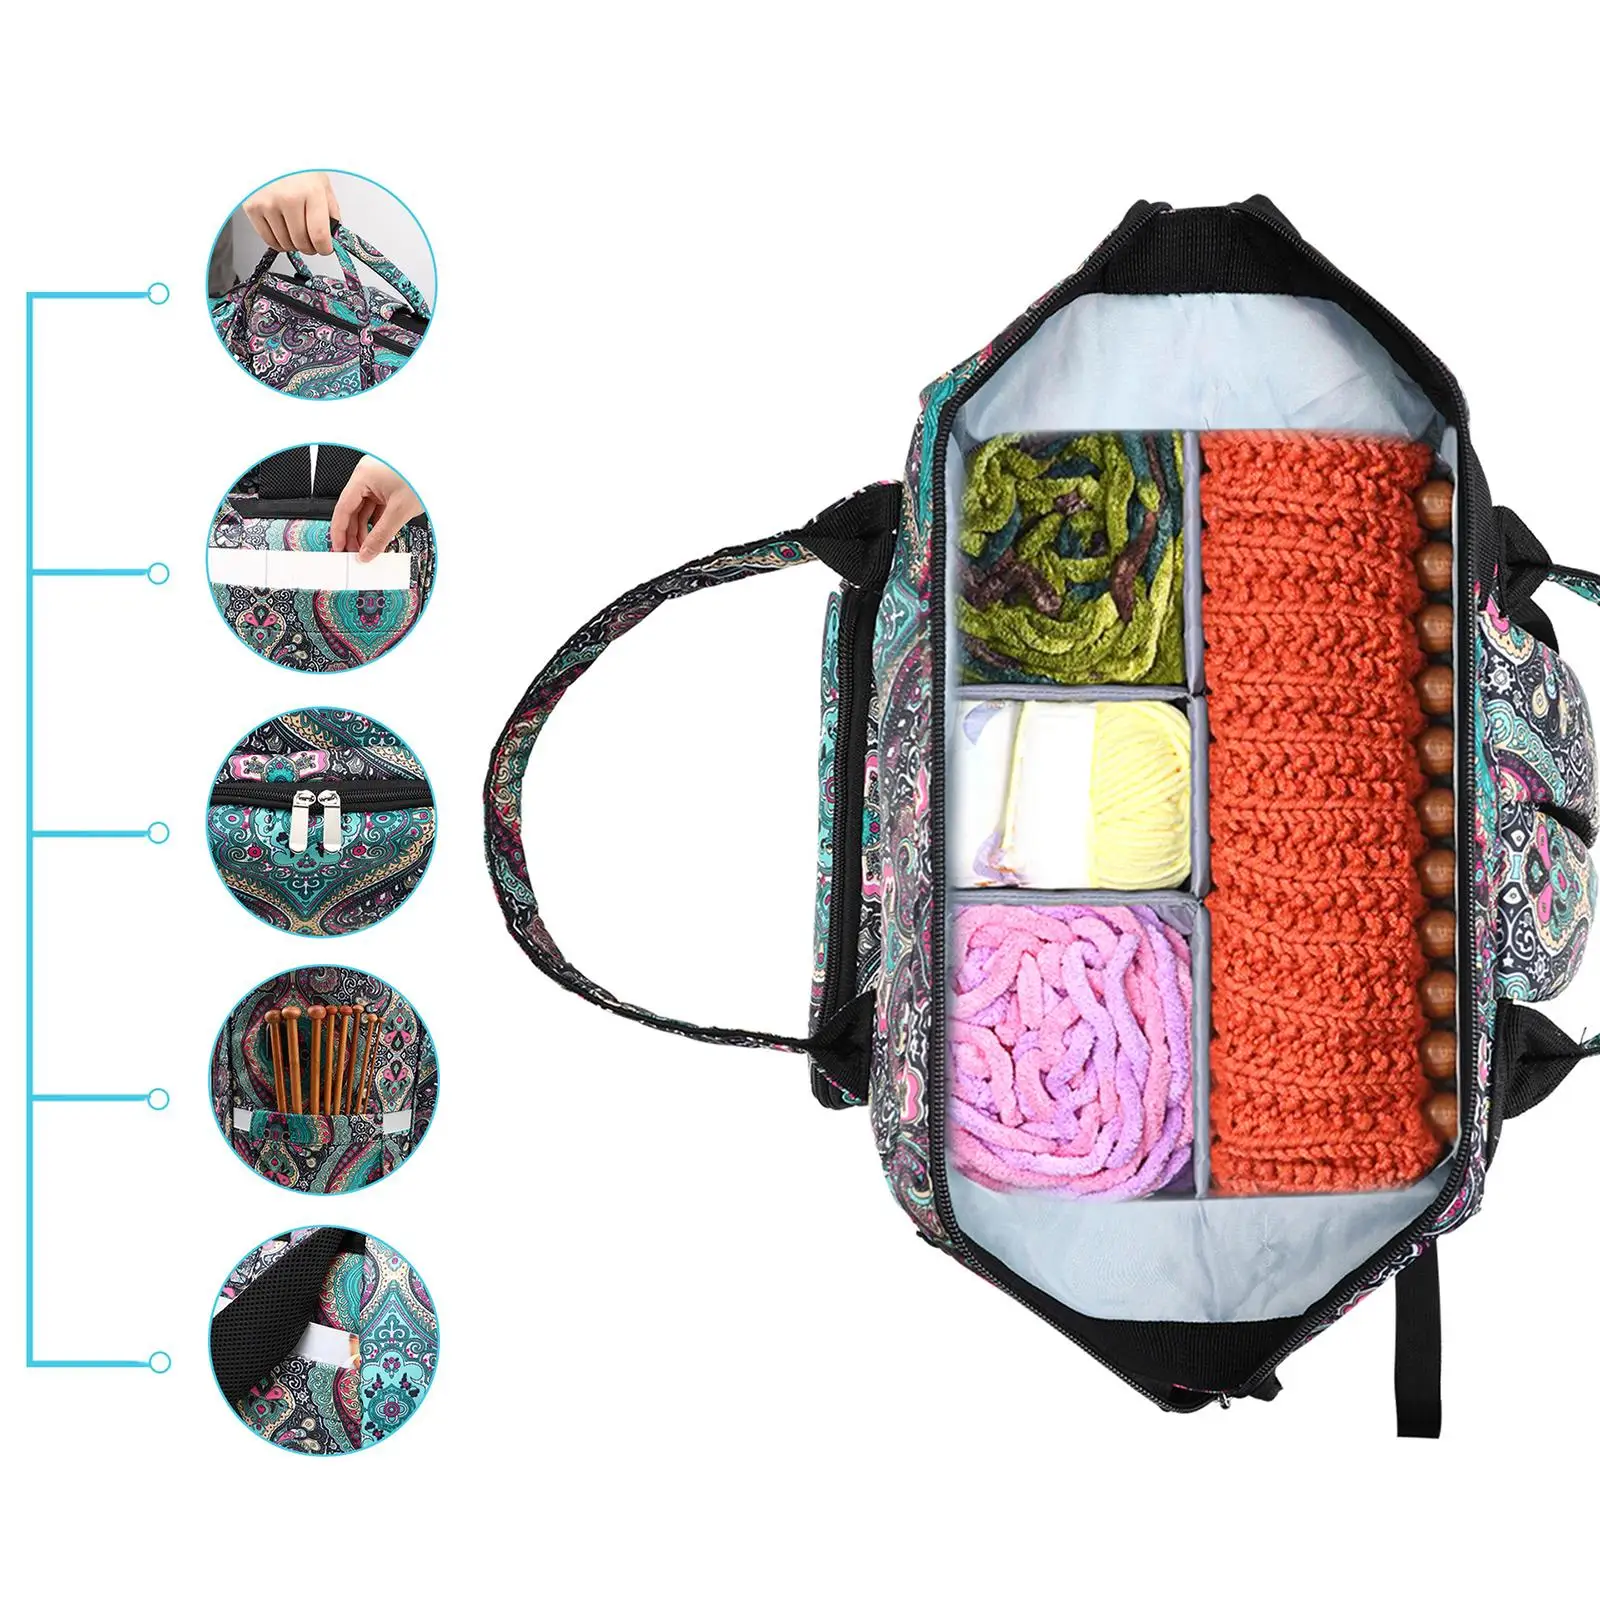 Crochet Backpack Storage for Carrying Projects Household Knitting Needle